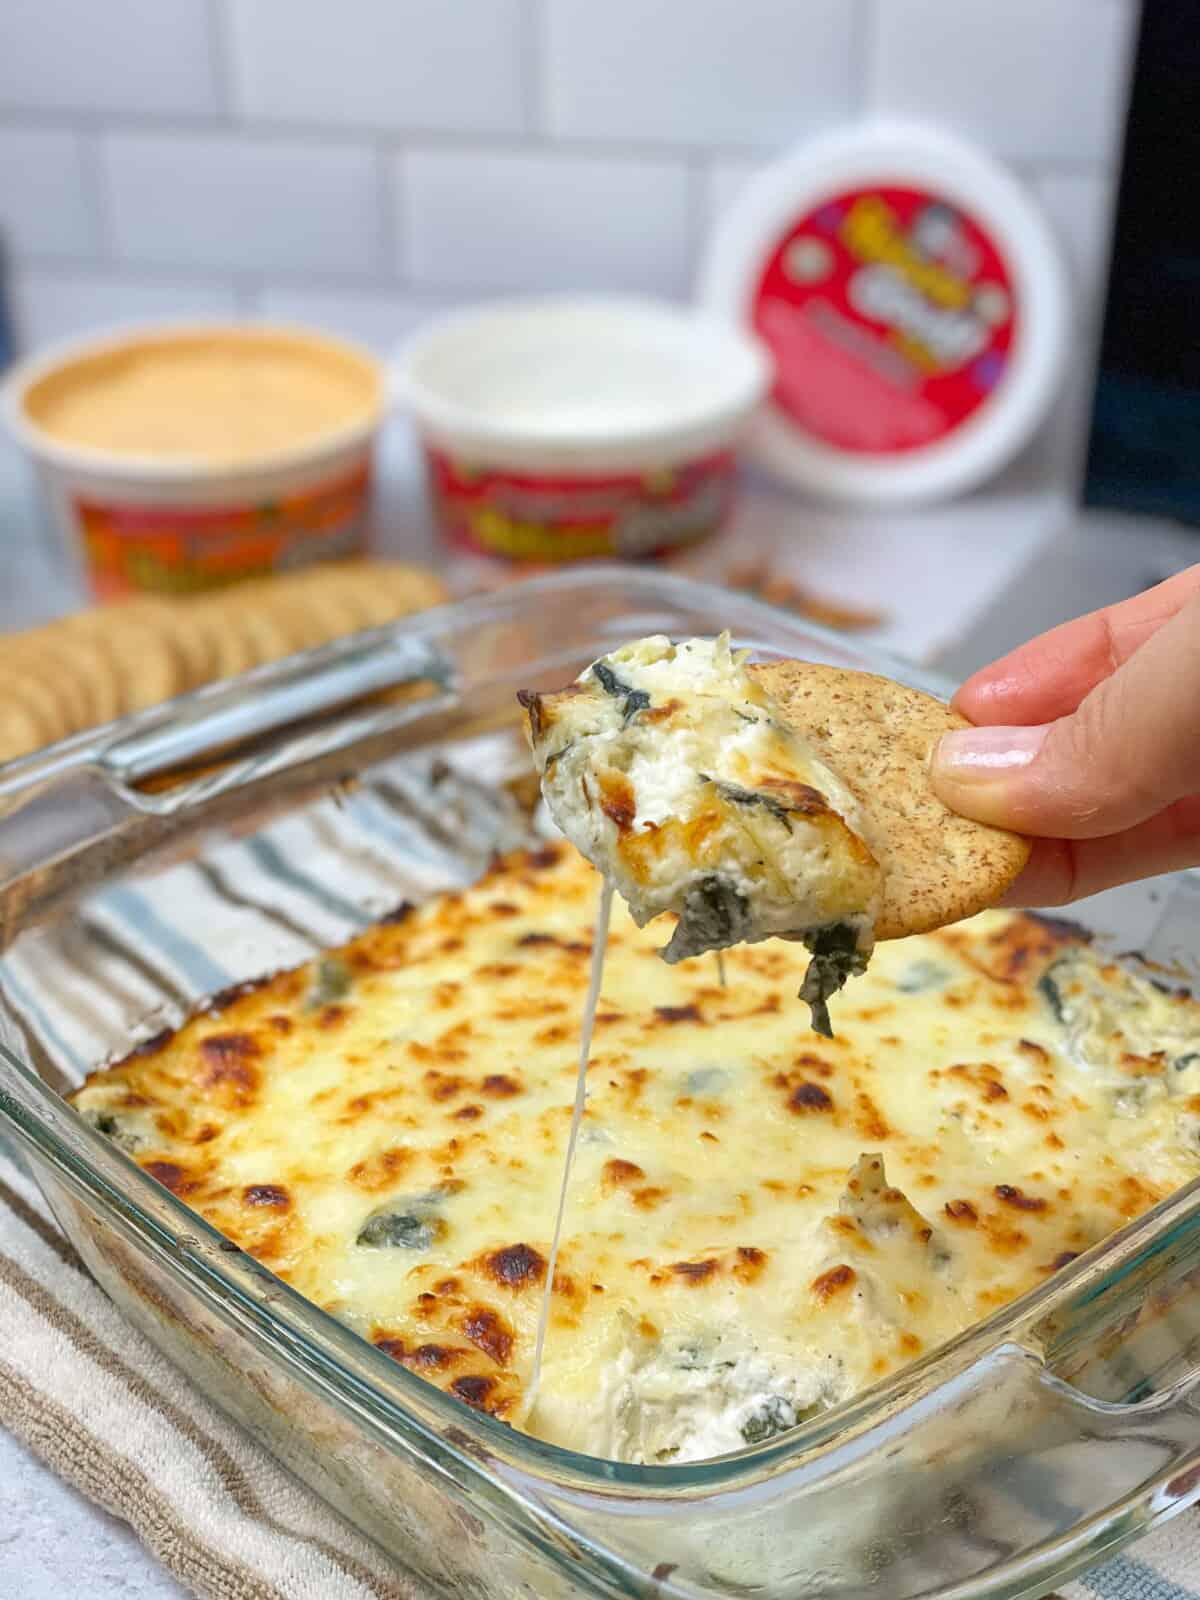 An image showing a delicious casserole of Spinach Artichoke Dip. A hand holding a cracker pulling some of the dip, creating a cheese pull.